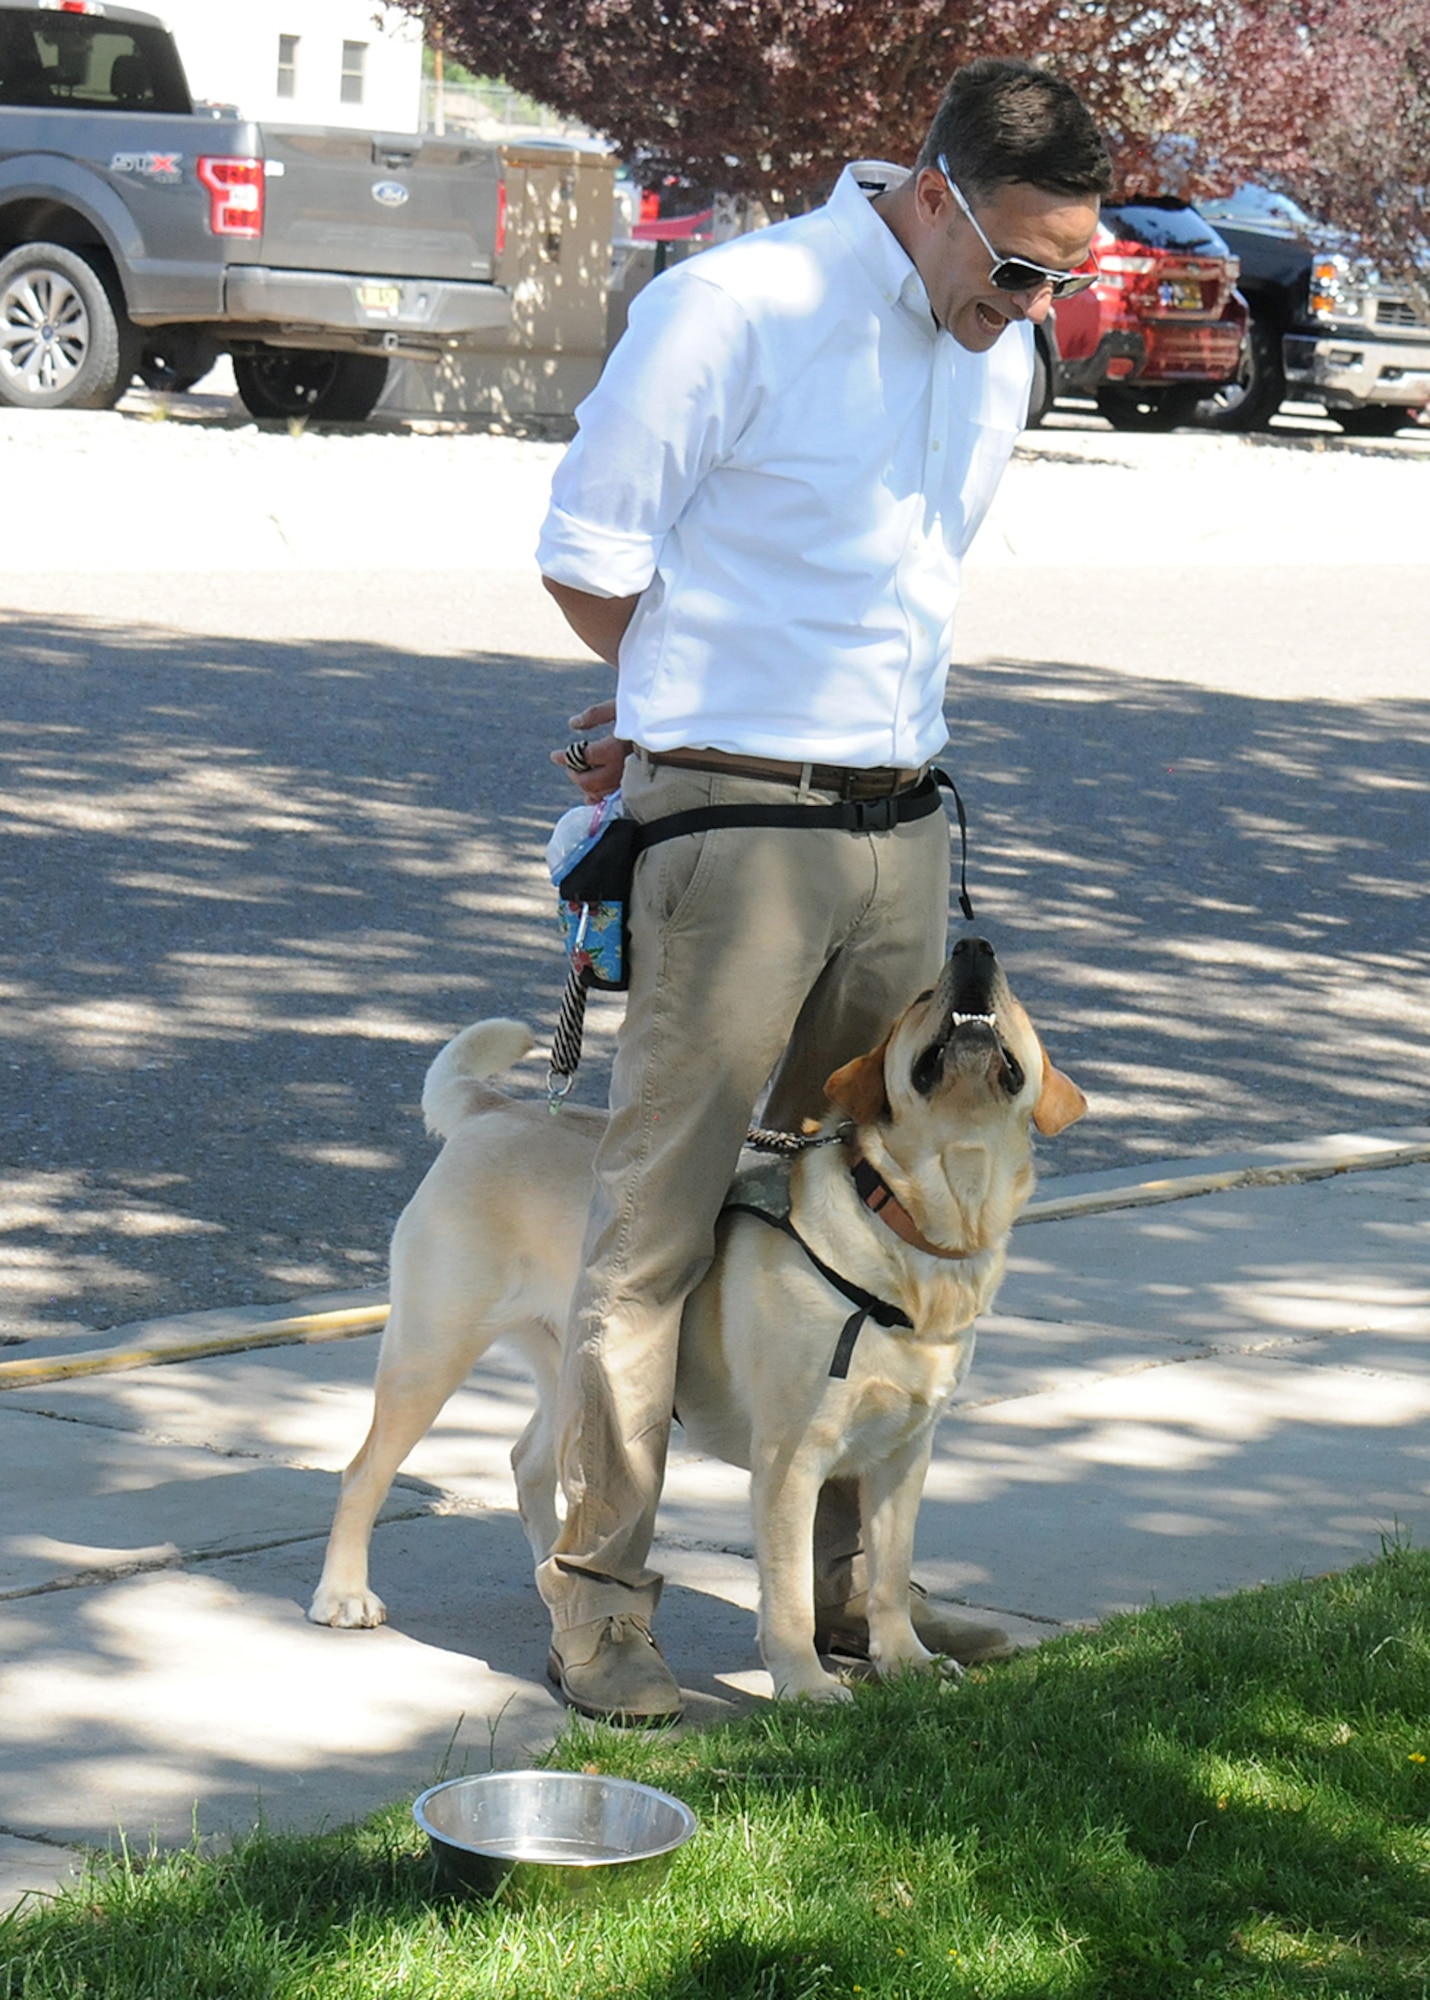 Man interacts with service dog